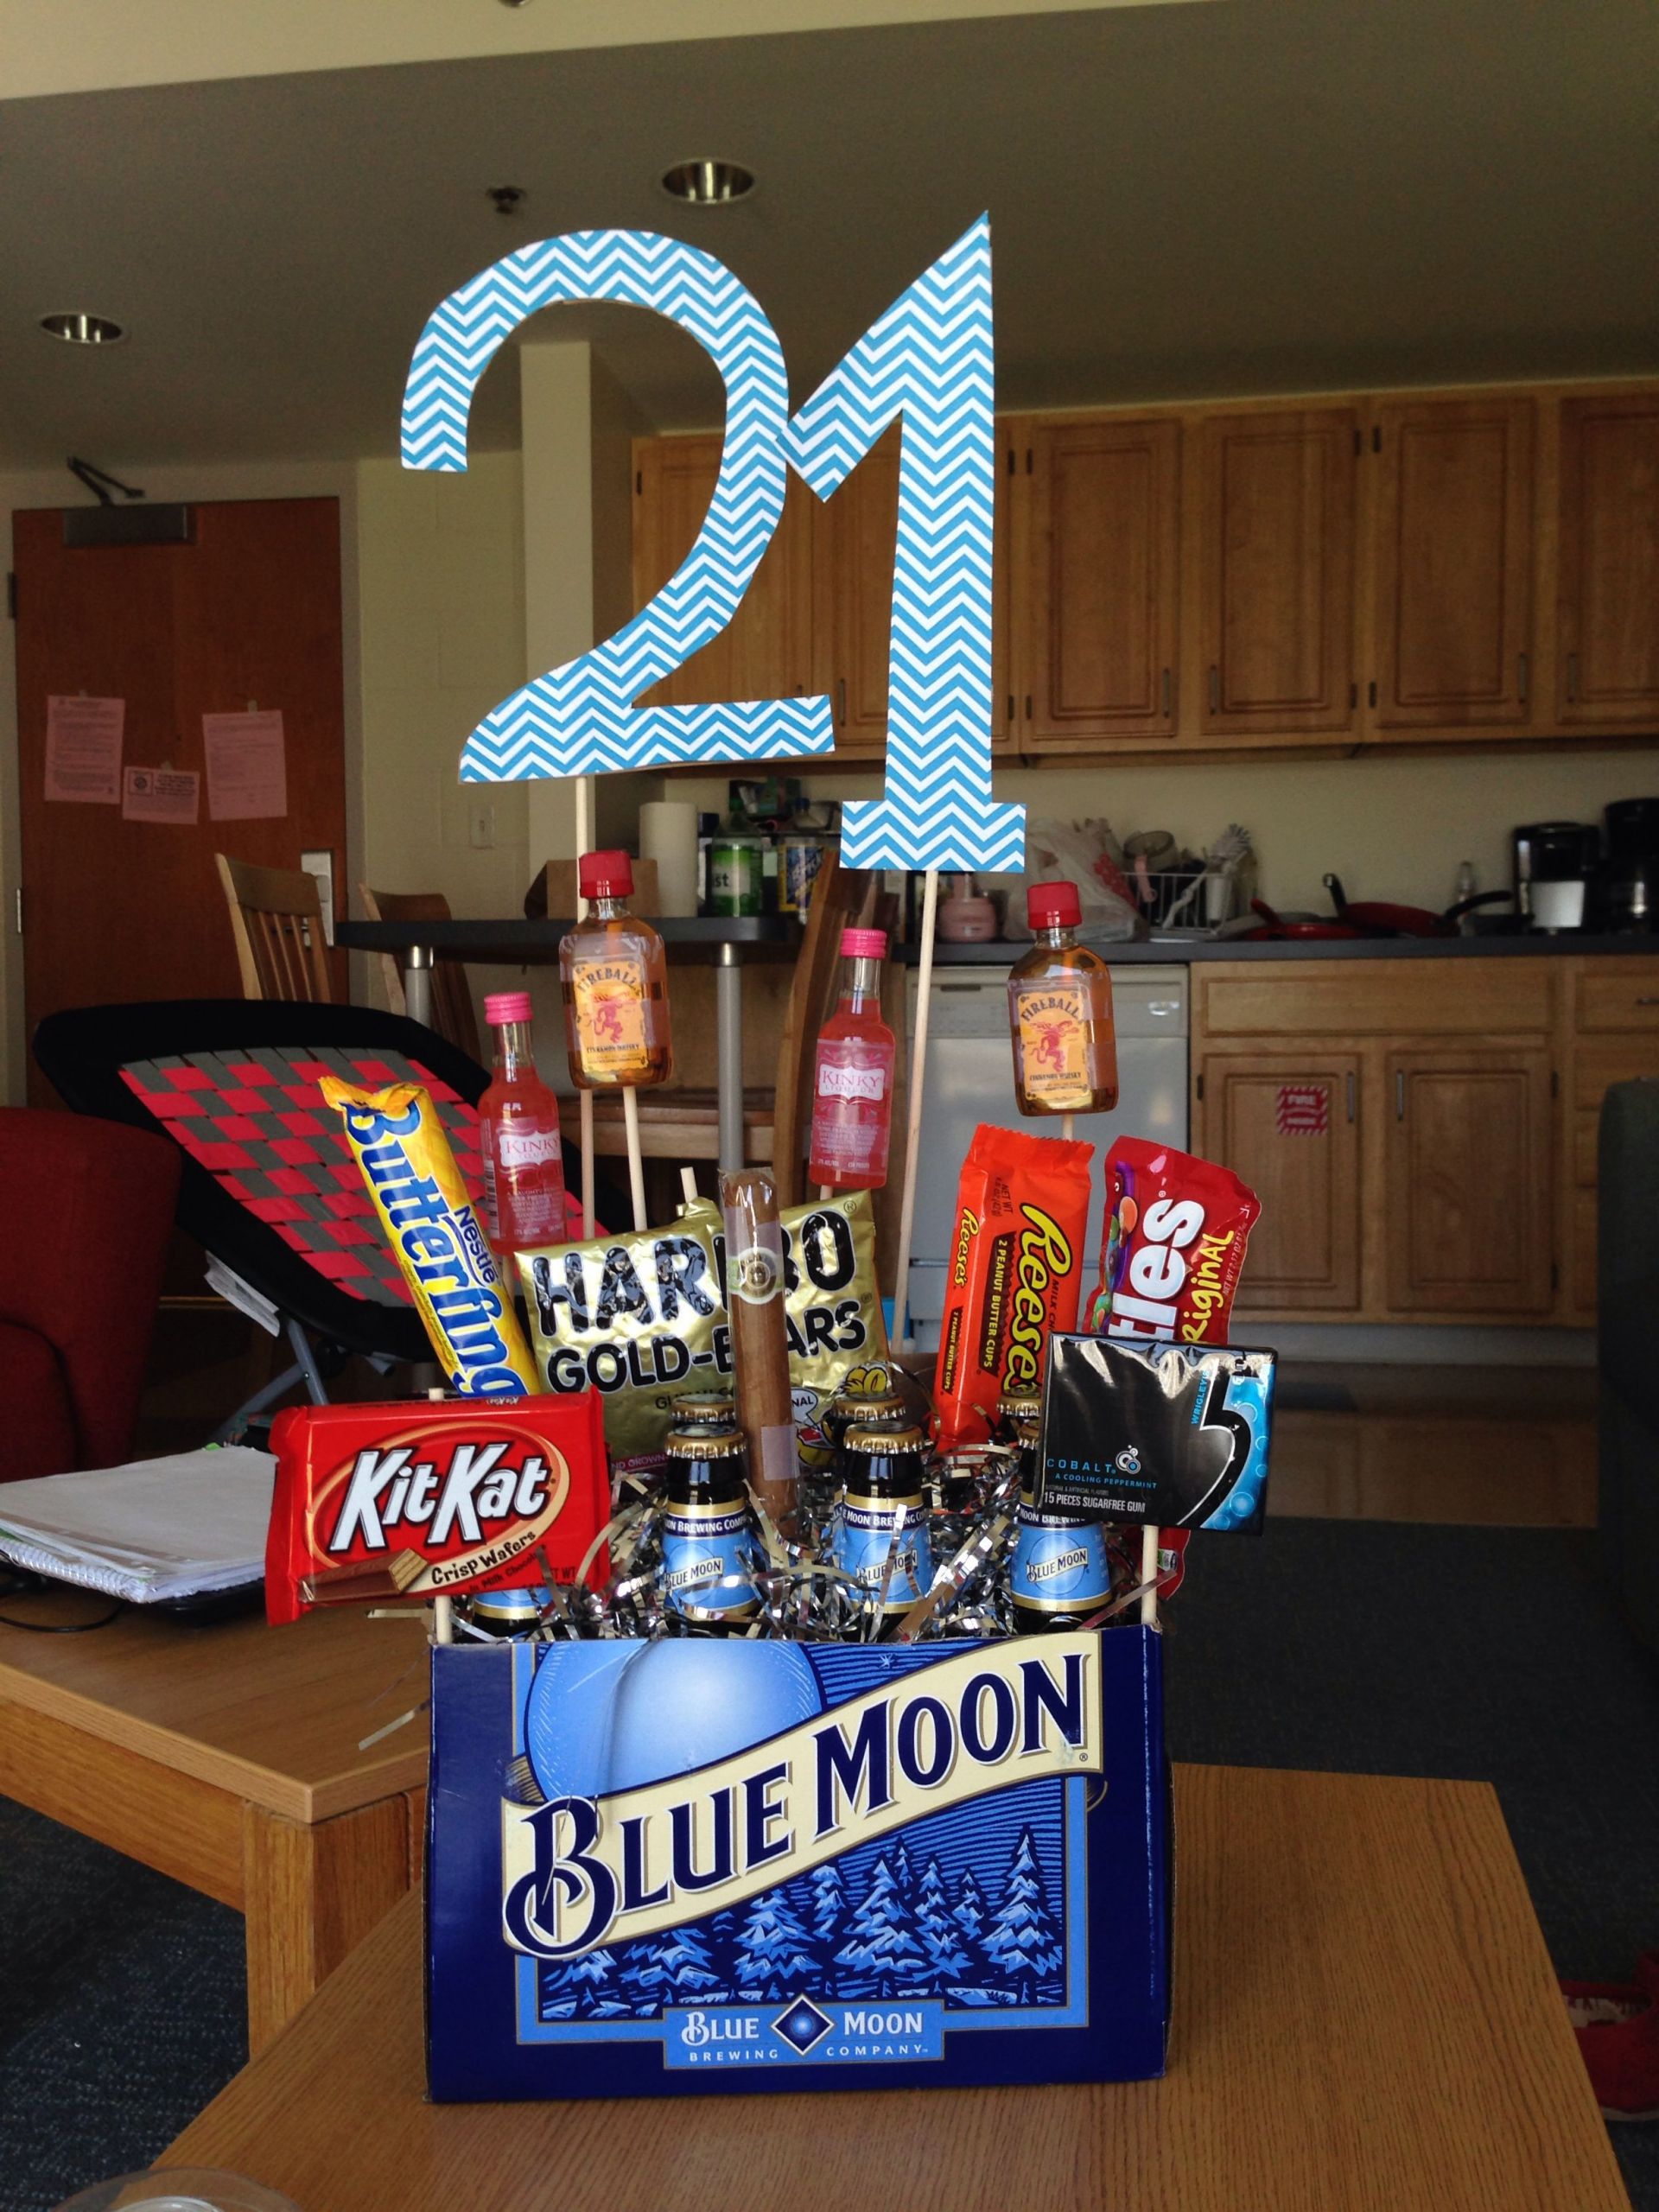 Creative 21St Birthday Gift Ideas For Him
 Can t believe hes 21 this year love this idea as